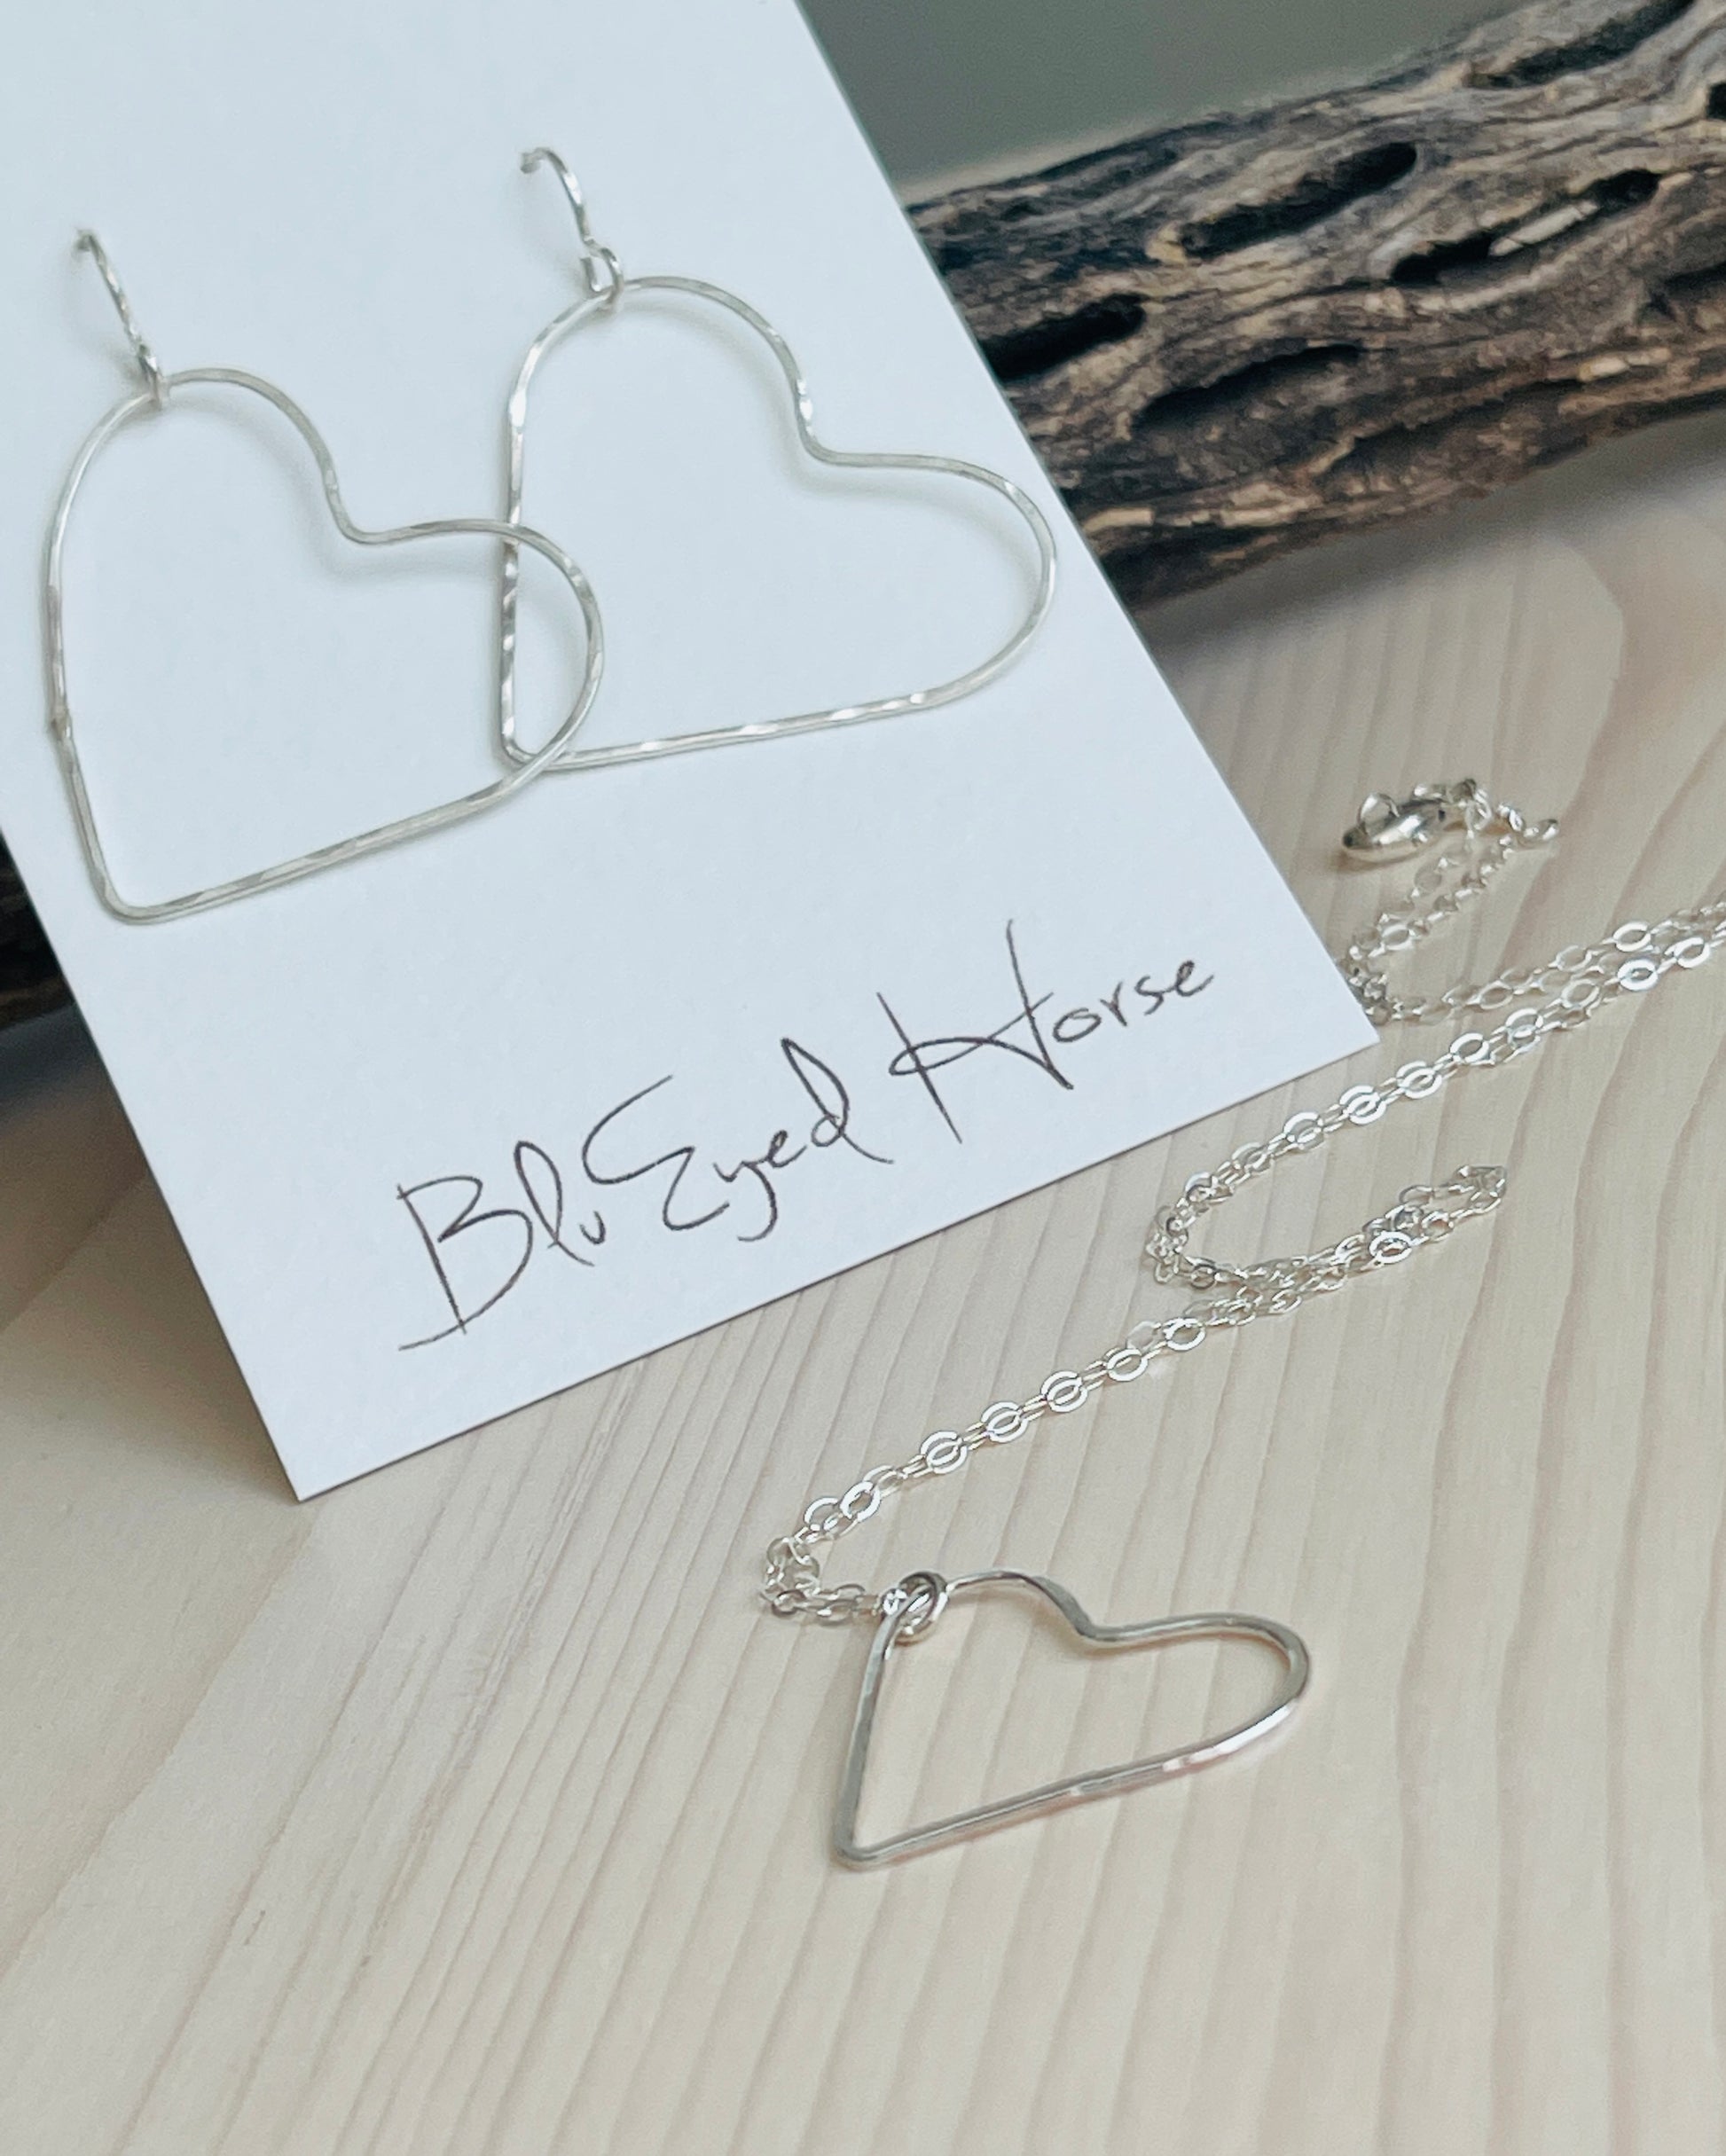 Silver Floating Heart Necklace with heart shaped earrings with driftwood in background